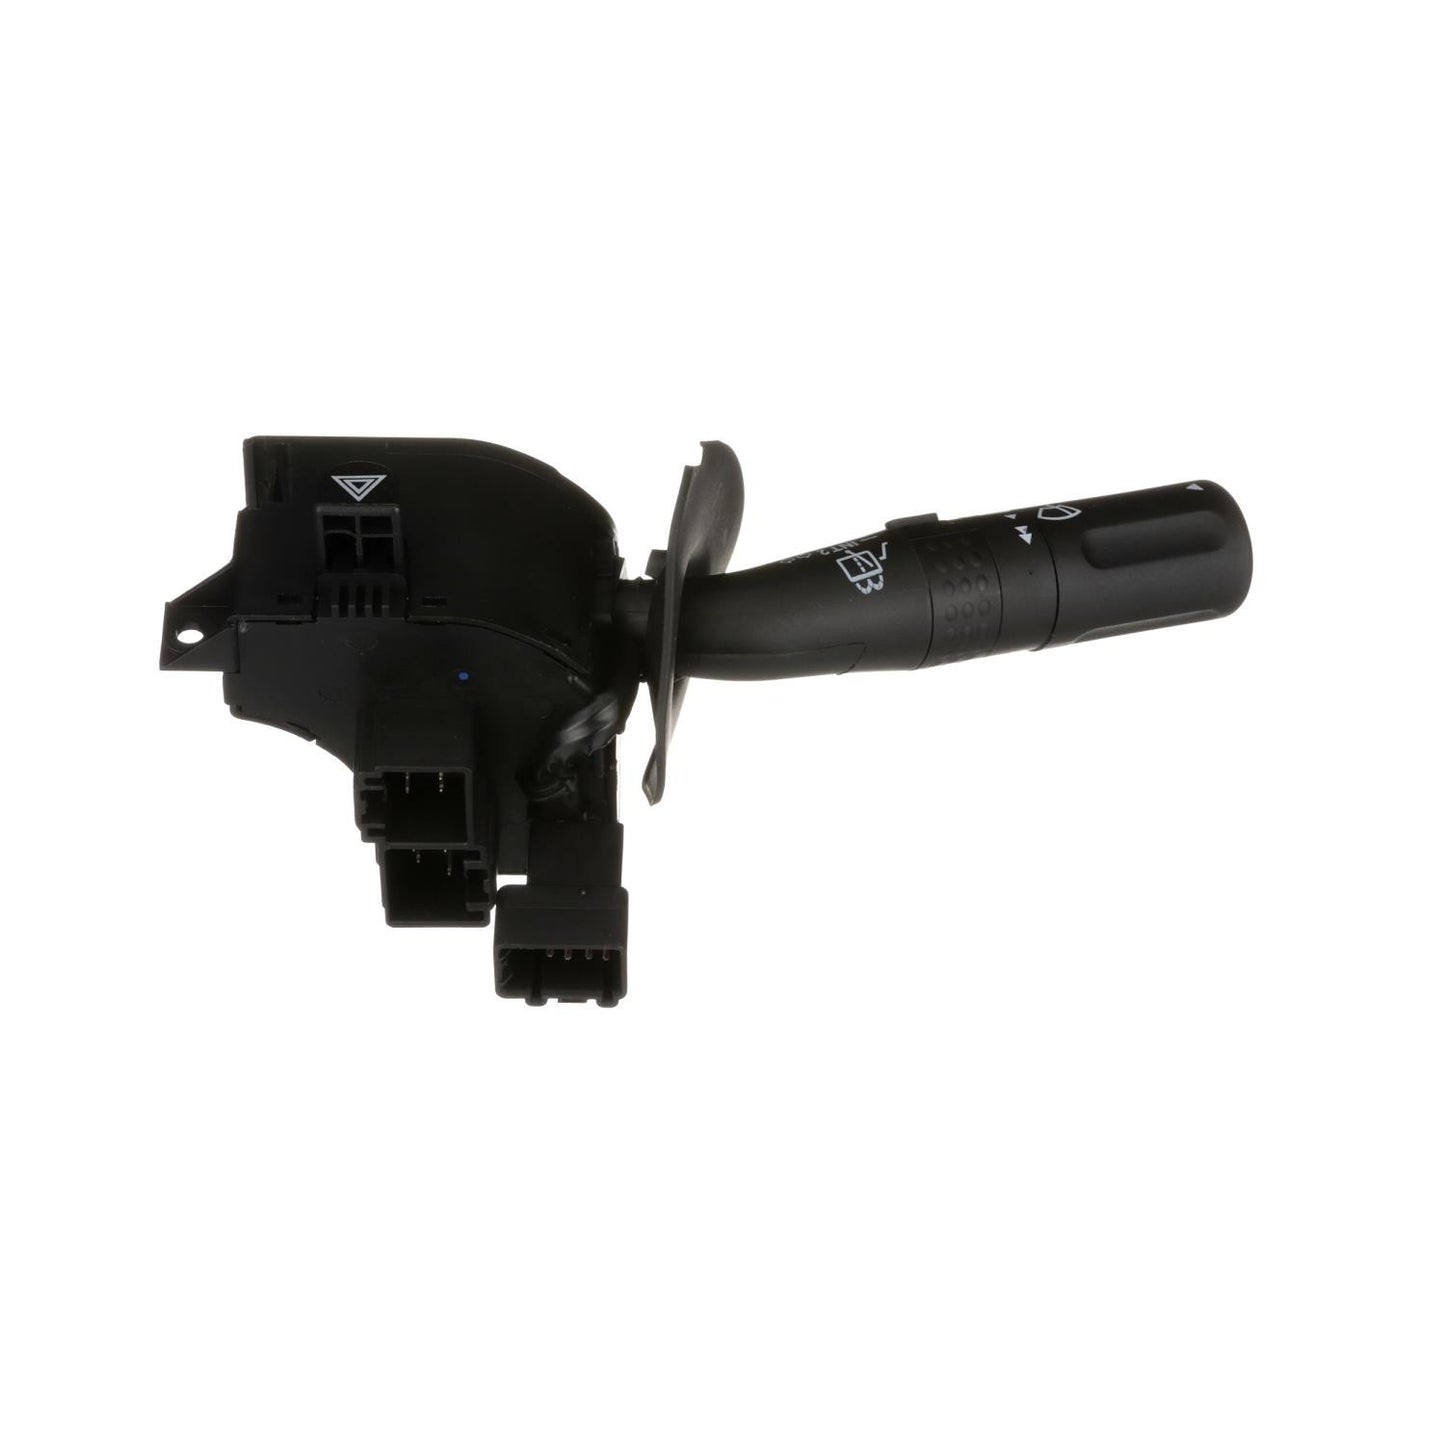 Windshield Wiper Switch STANDARD IGNITION CBS-1172 For Mercury Ford Mountaineer Expedition Explorer